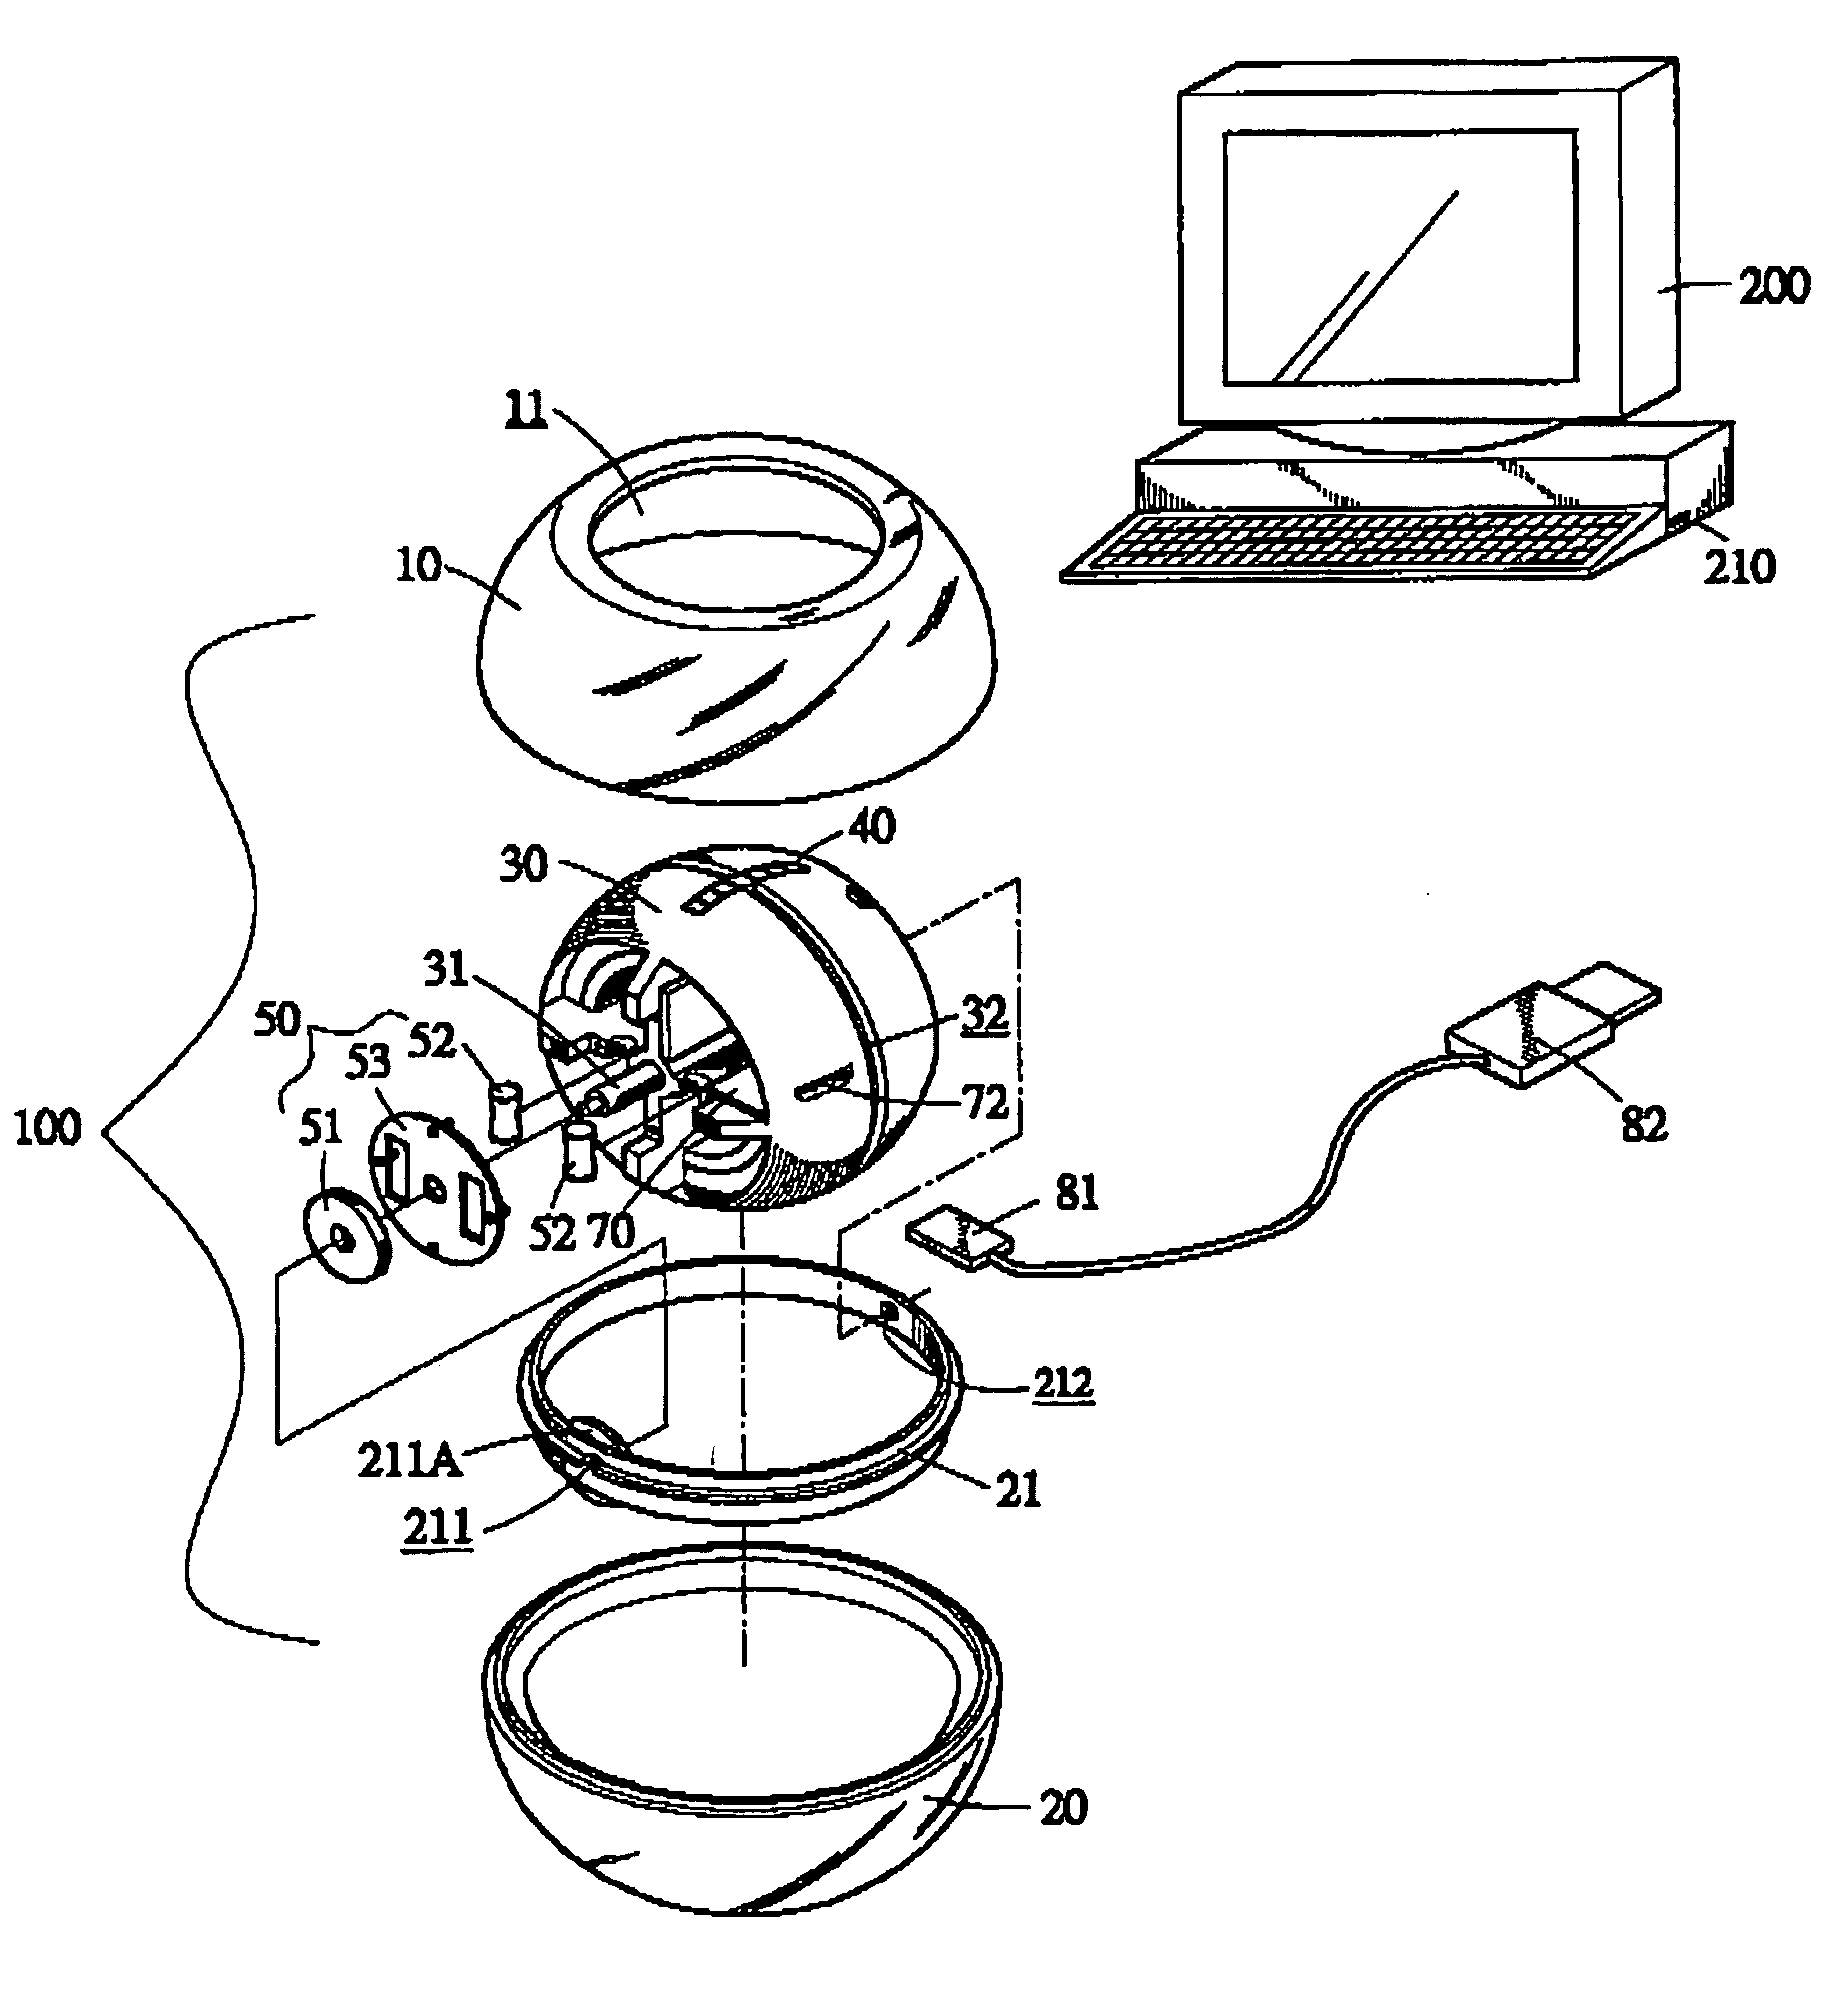 Wrist exerciser having display and transmission device